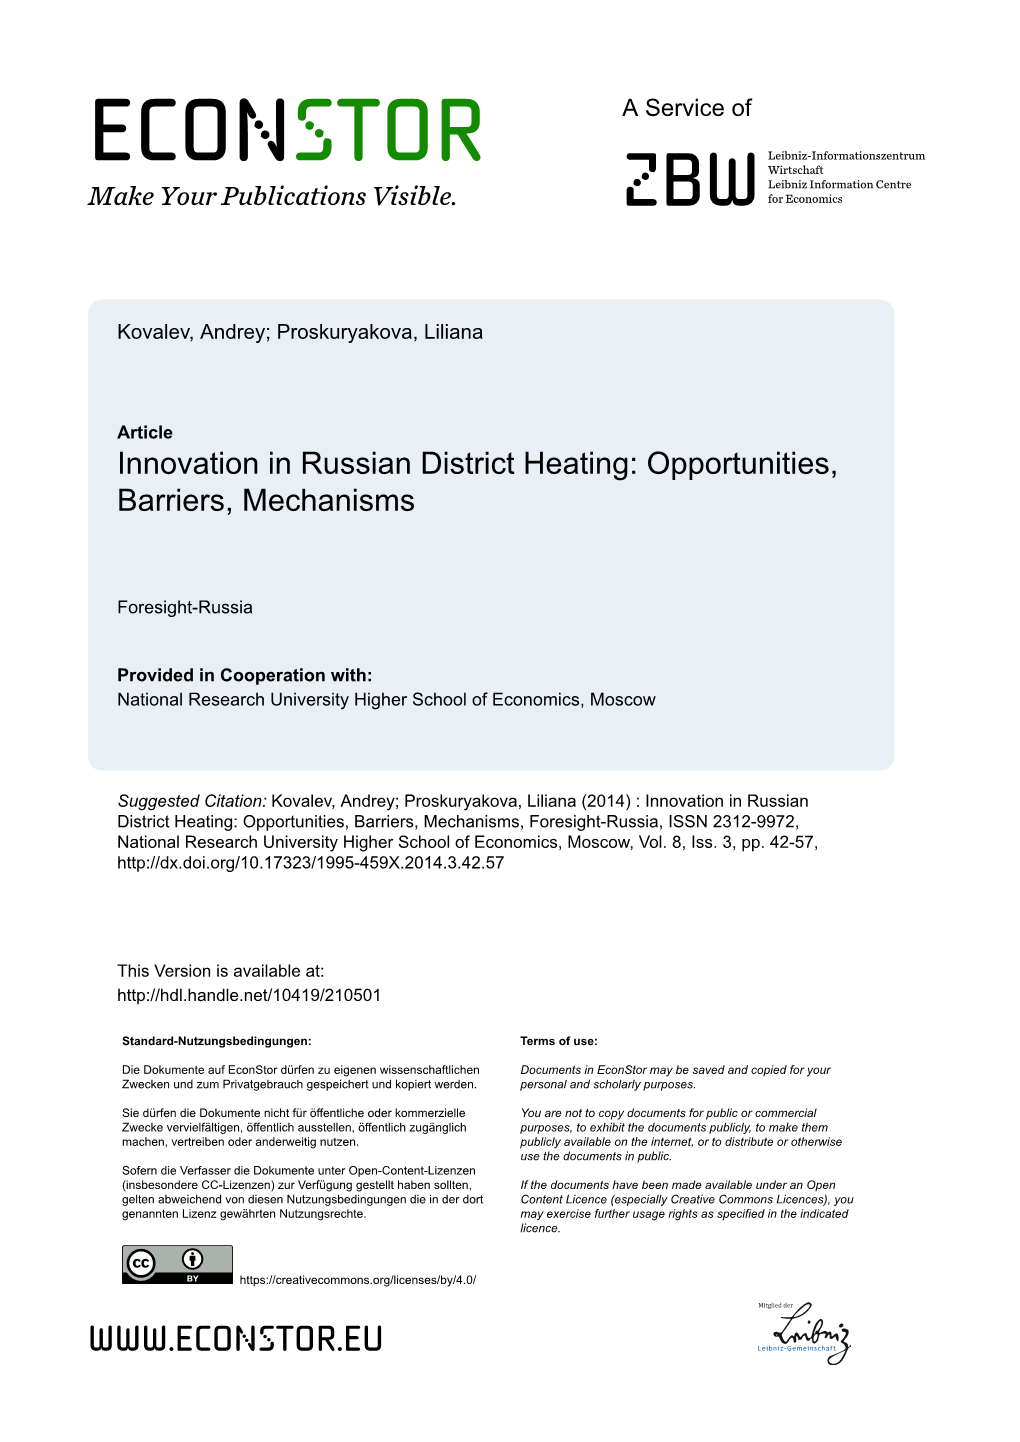 Innovation in Russian District Heating: Opportunities, Barriers, Mechanisms